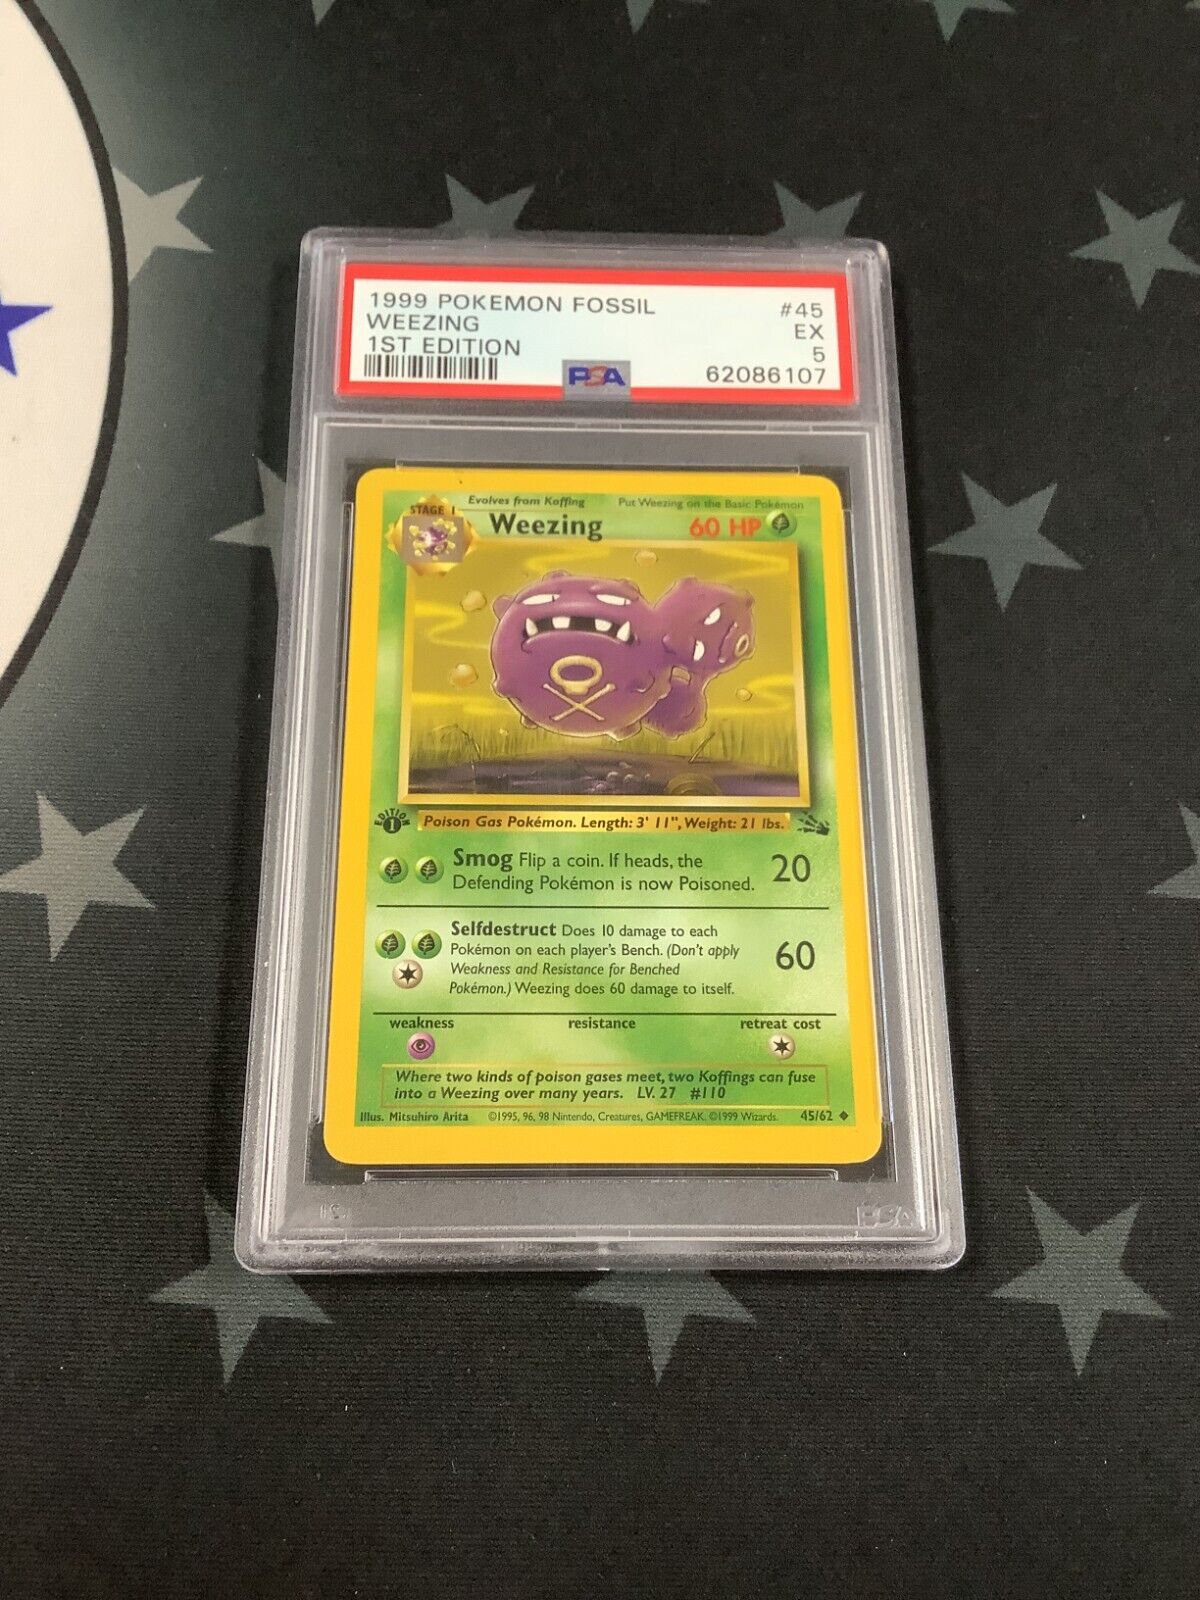 1999 POKEMON FOSSIL #45 WEEZING EX 1ST EDITION 5 62086107